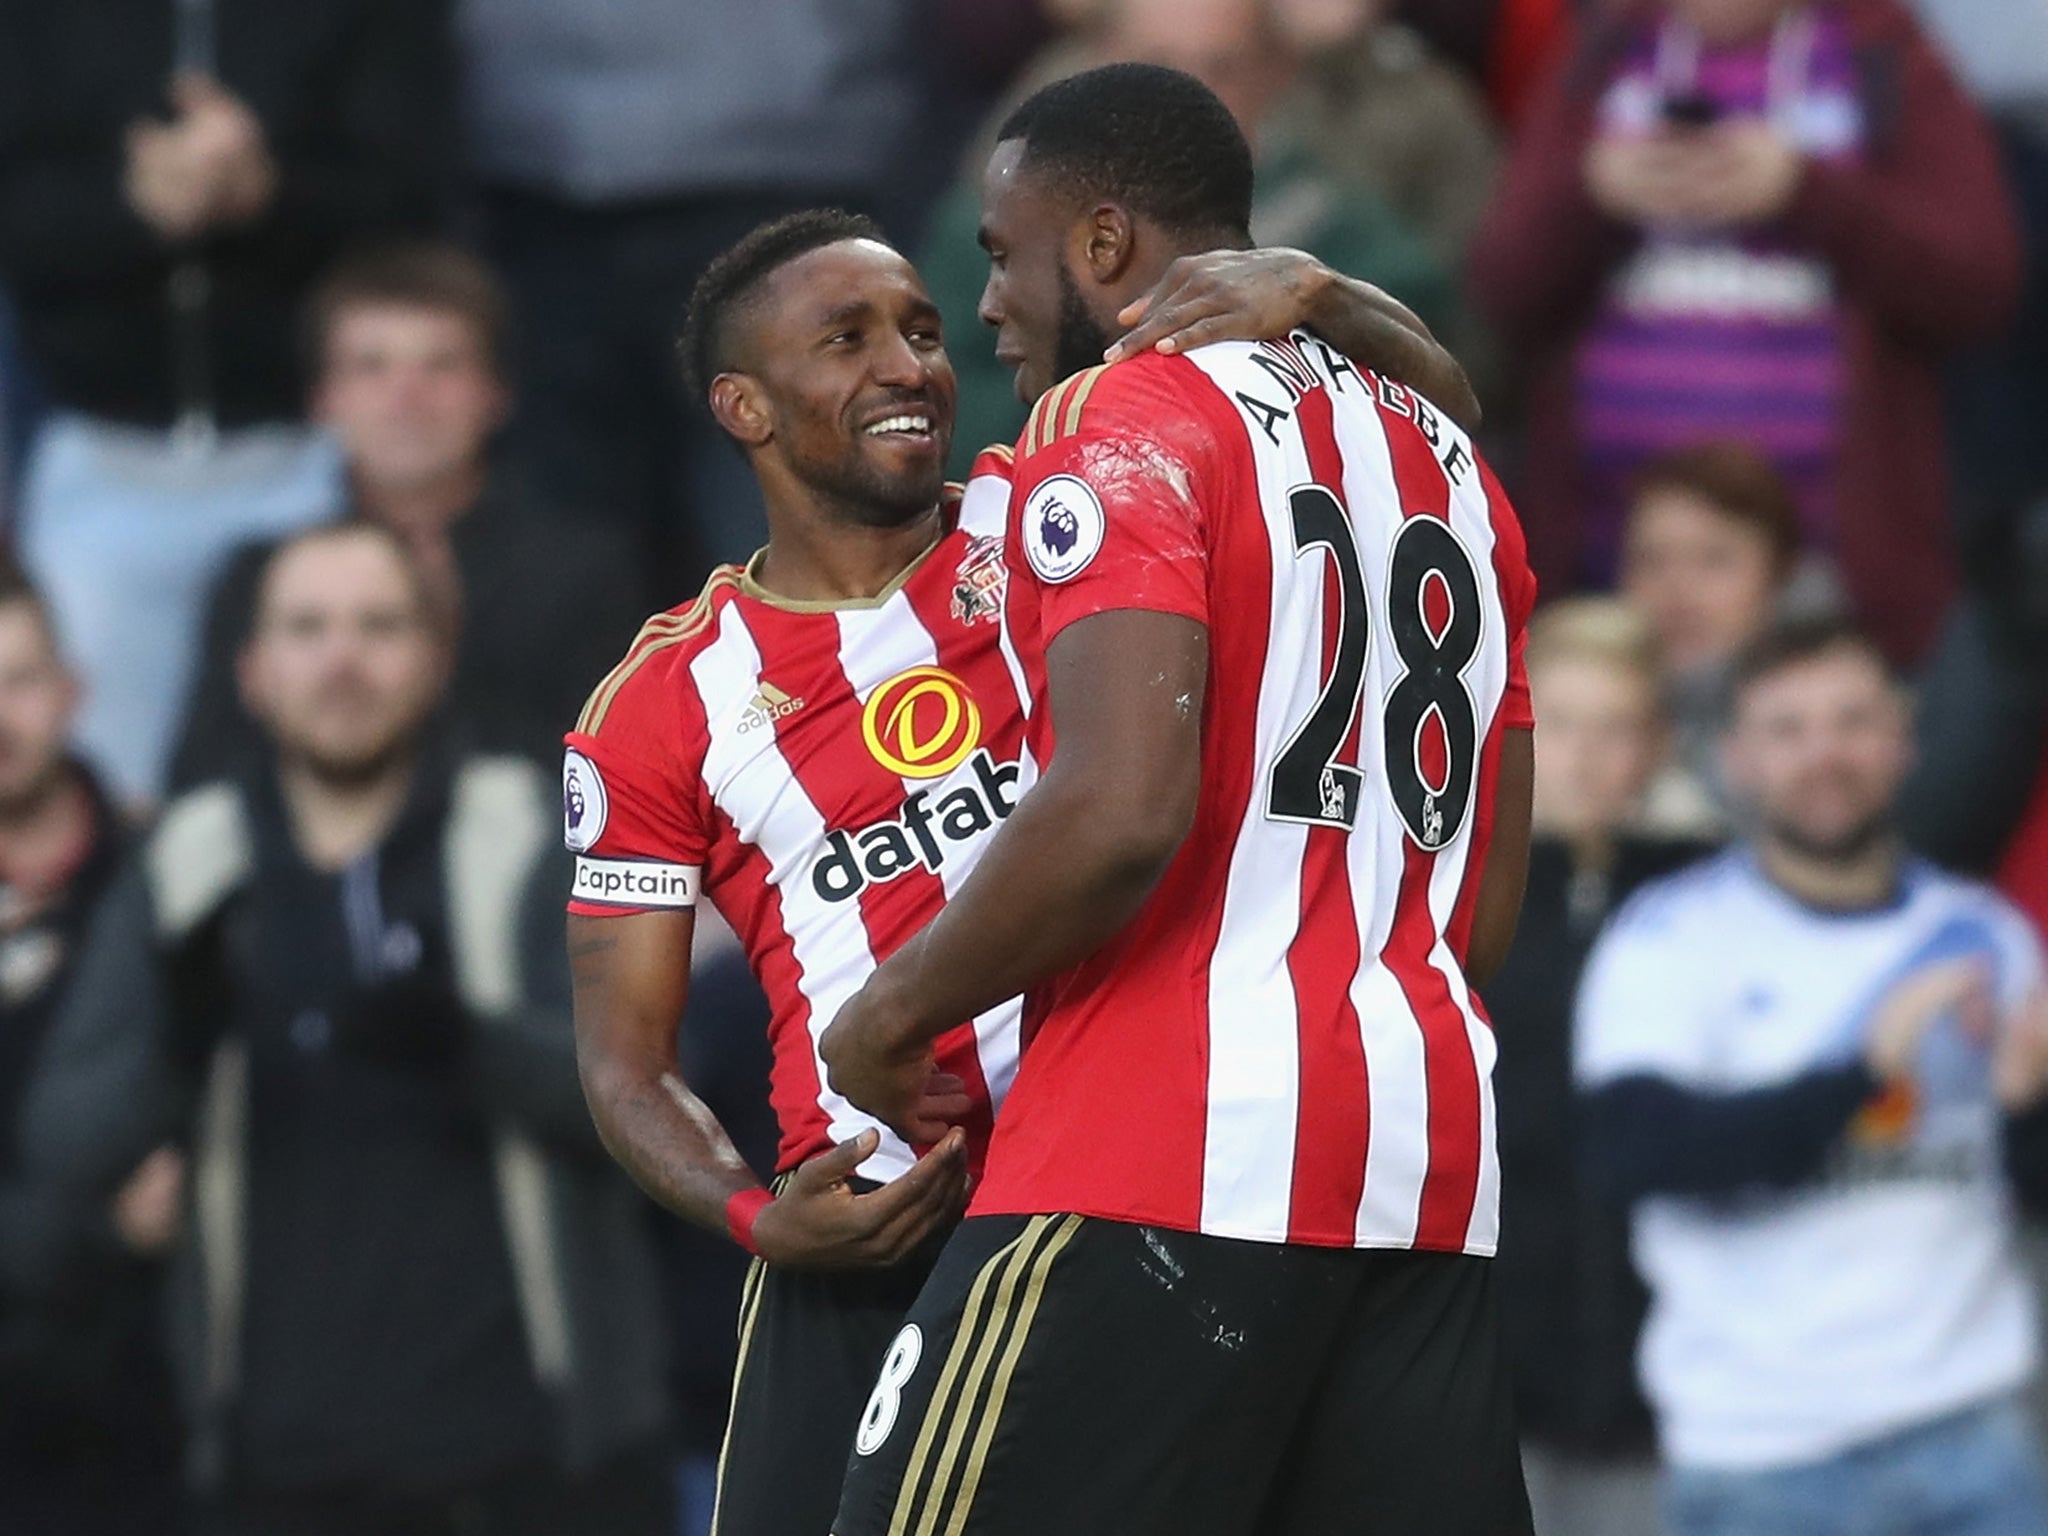 Defoe is congratulated on his opening goal by Anichebe